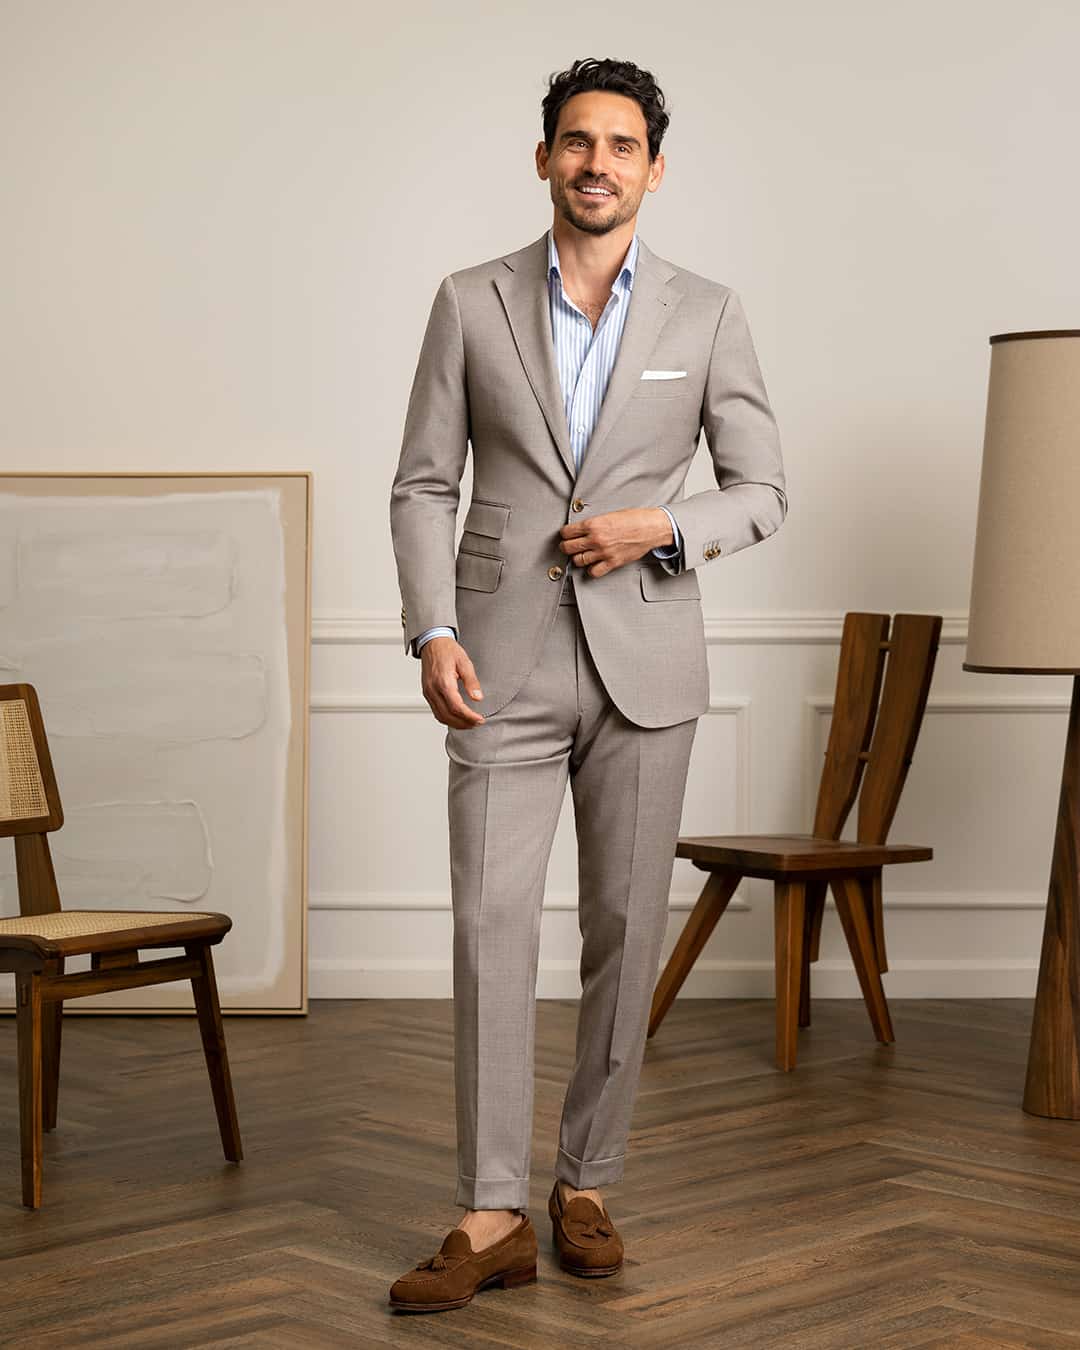 How To Dress Sneakers With Suits For A Sleek Outfit-Bruno Marc